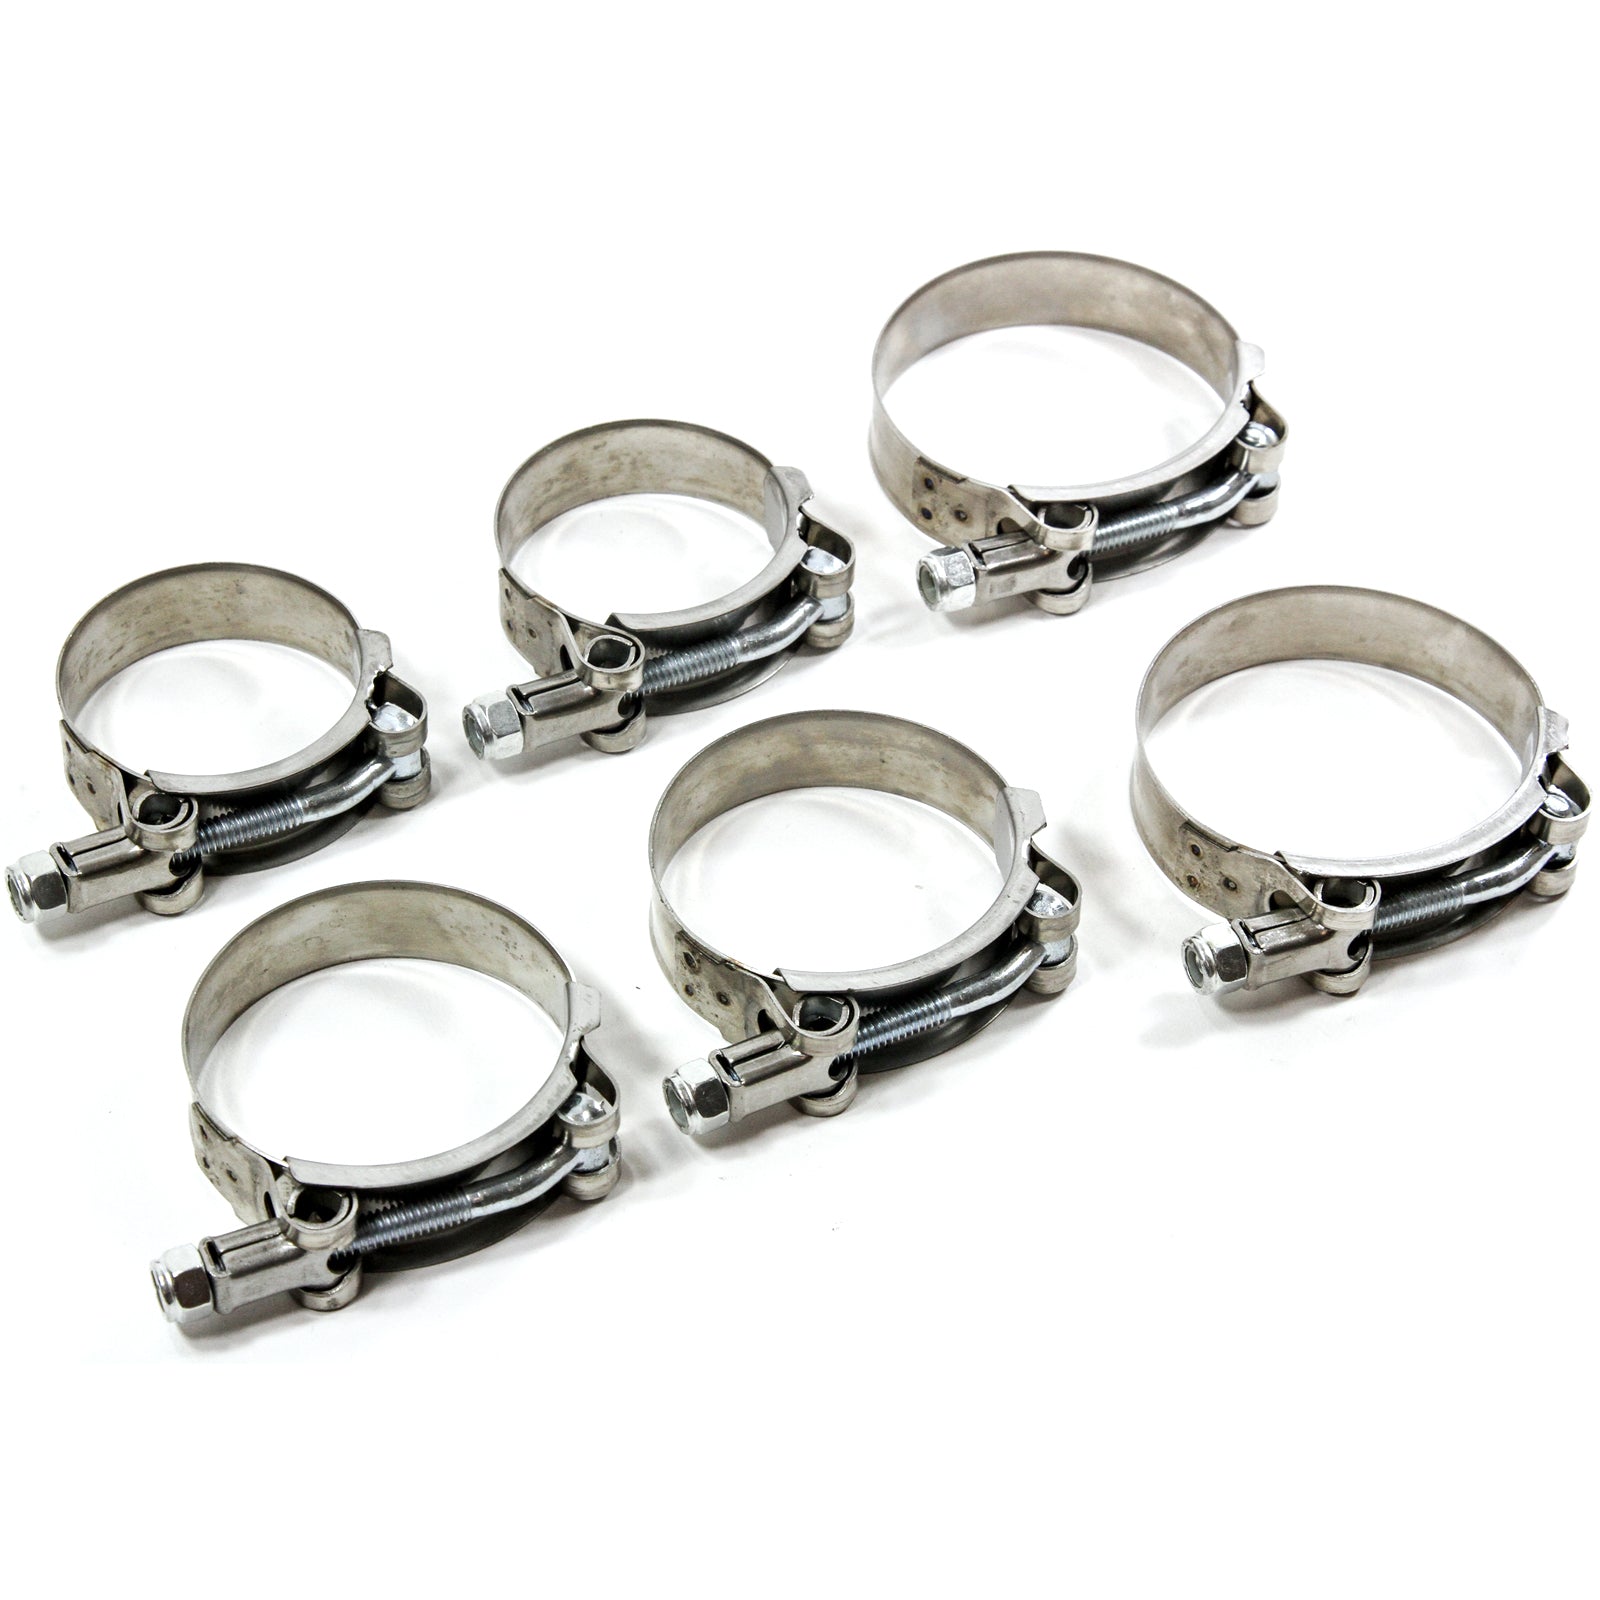 2 ea 1.75 Inches-2 Inches-2.5 Inches of Stainless Metal Steel Hose Clamps Assortment Variety 6pc